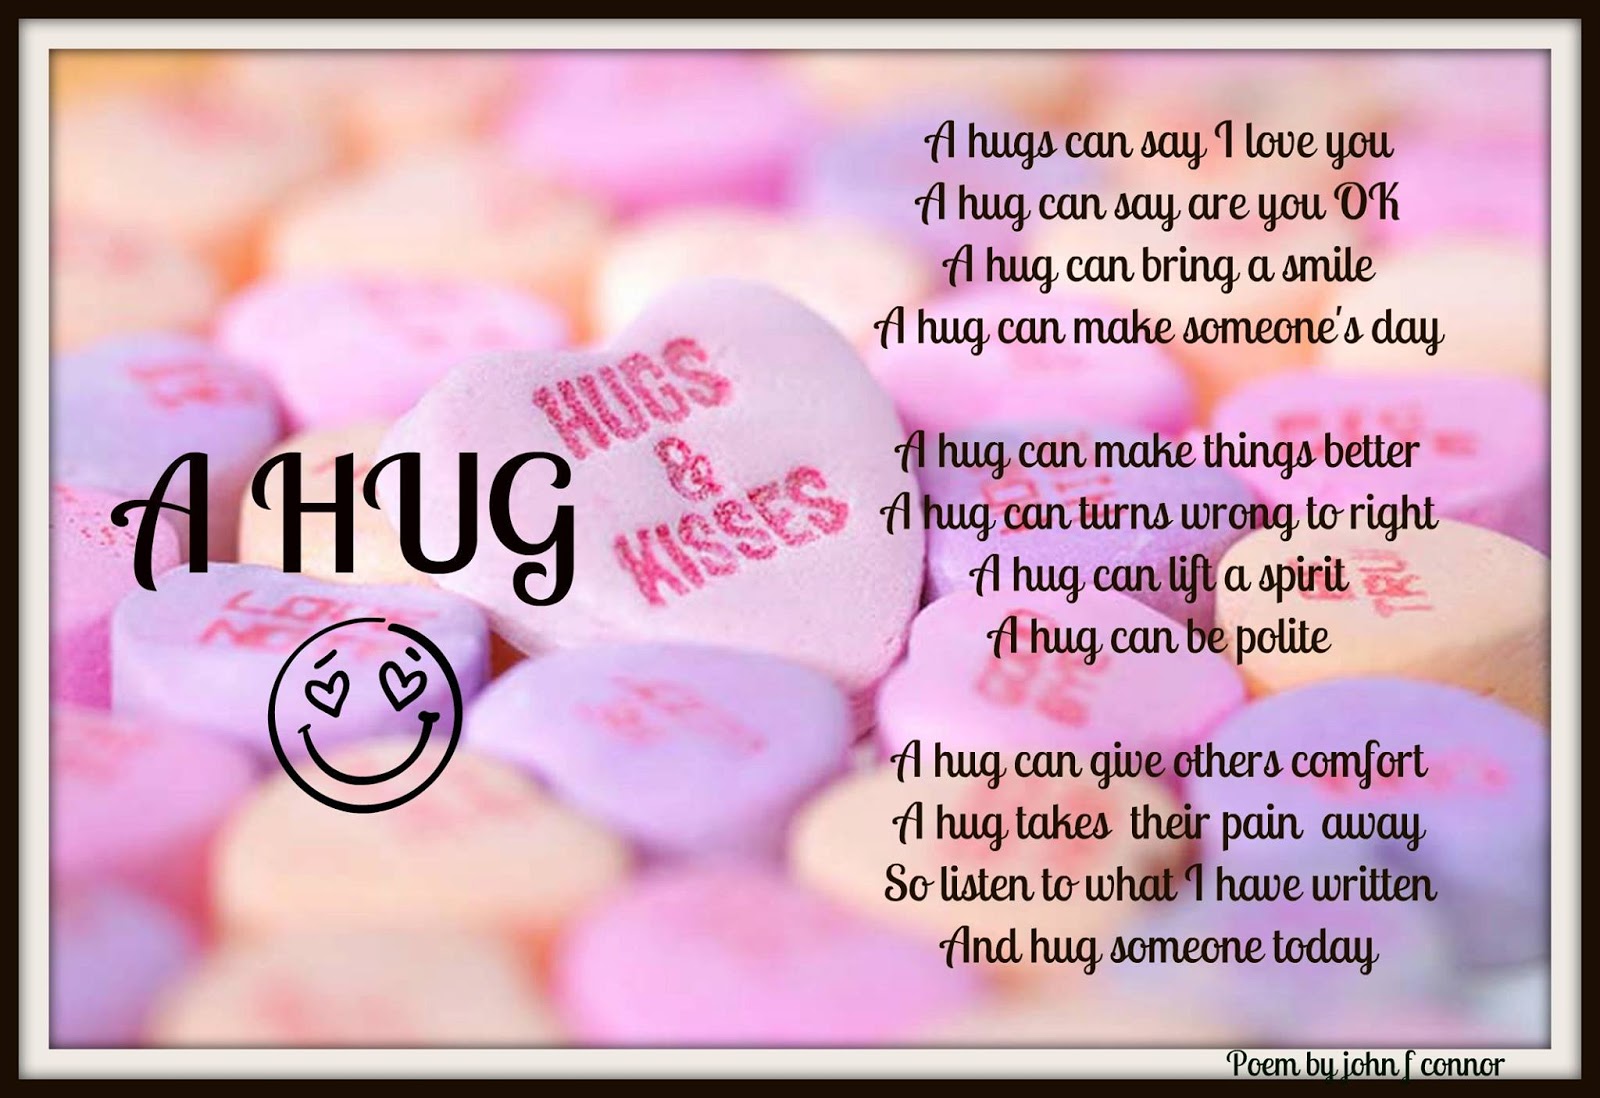 Quotes about hug and Love. Hugs is the best Medicine. Hug yourself. Sunny Heart hug.